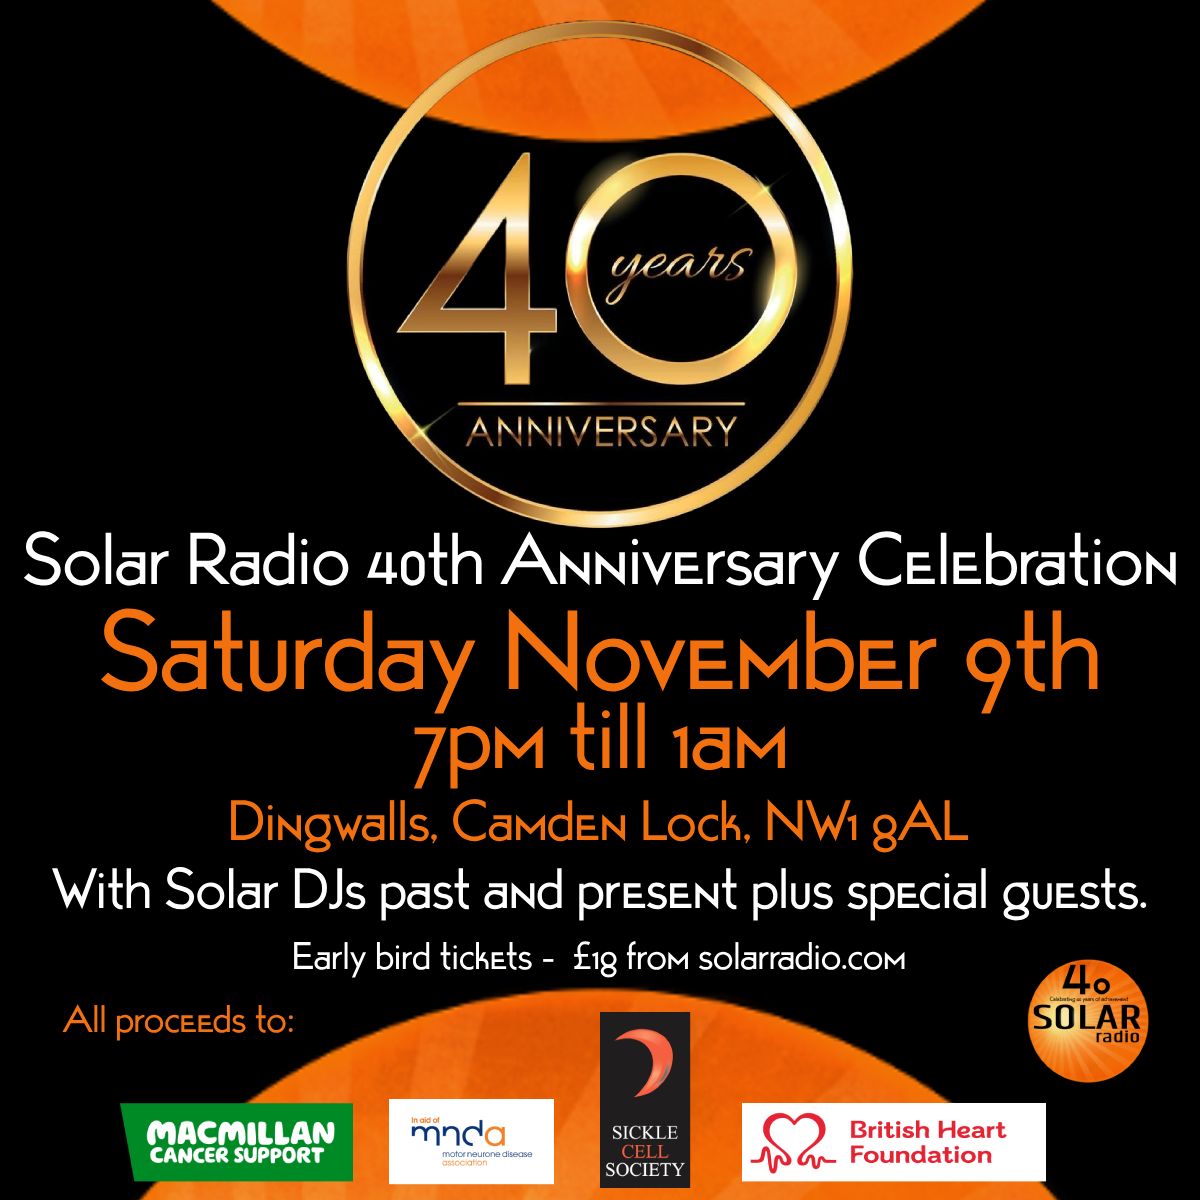 Solar Radio is marking 40 years with a special event on Saturday, November 9th, 2024. Early Bird tickets are available for £18.00 each, with proceeds supporting the Sickle Cell Society and other charities. For more details, visit: buff.ly/3K6Mbwg.